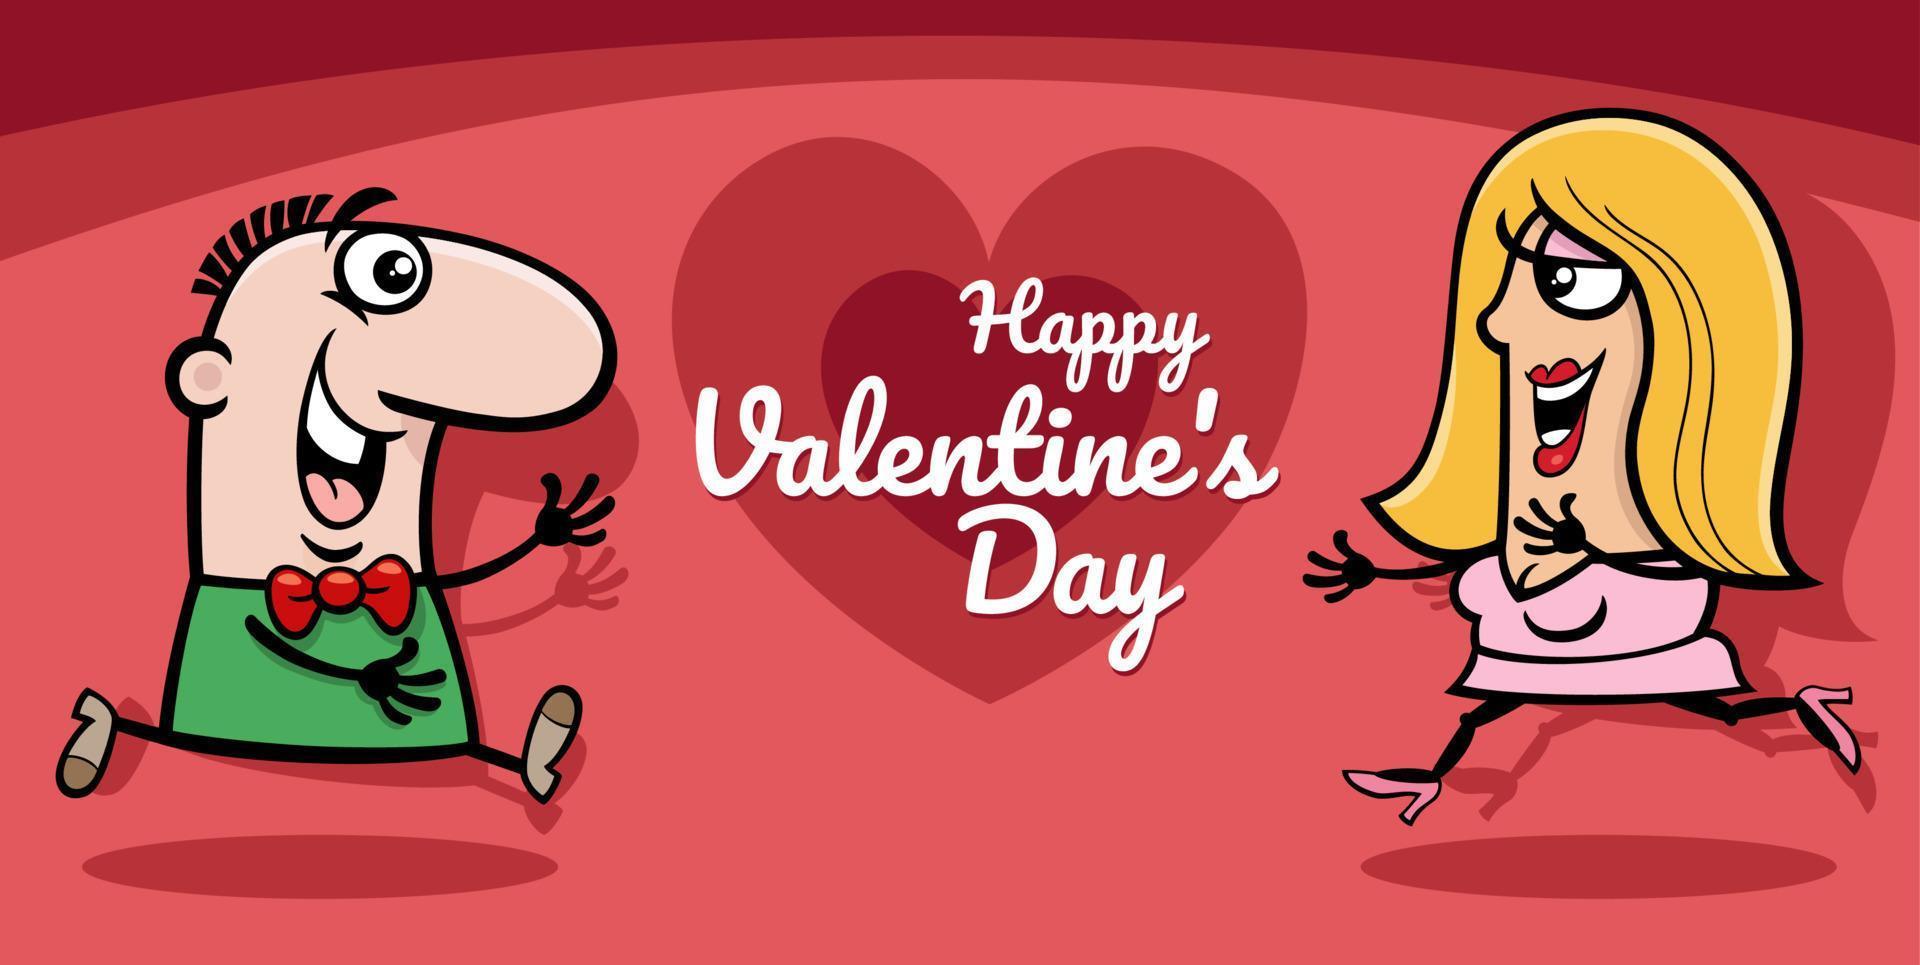 Valentines Day design with cartoon couple in love vector